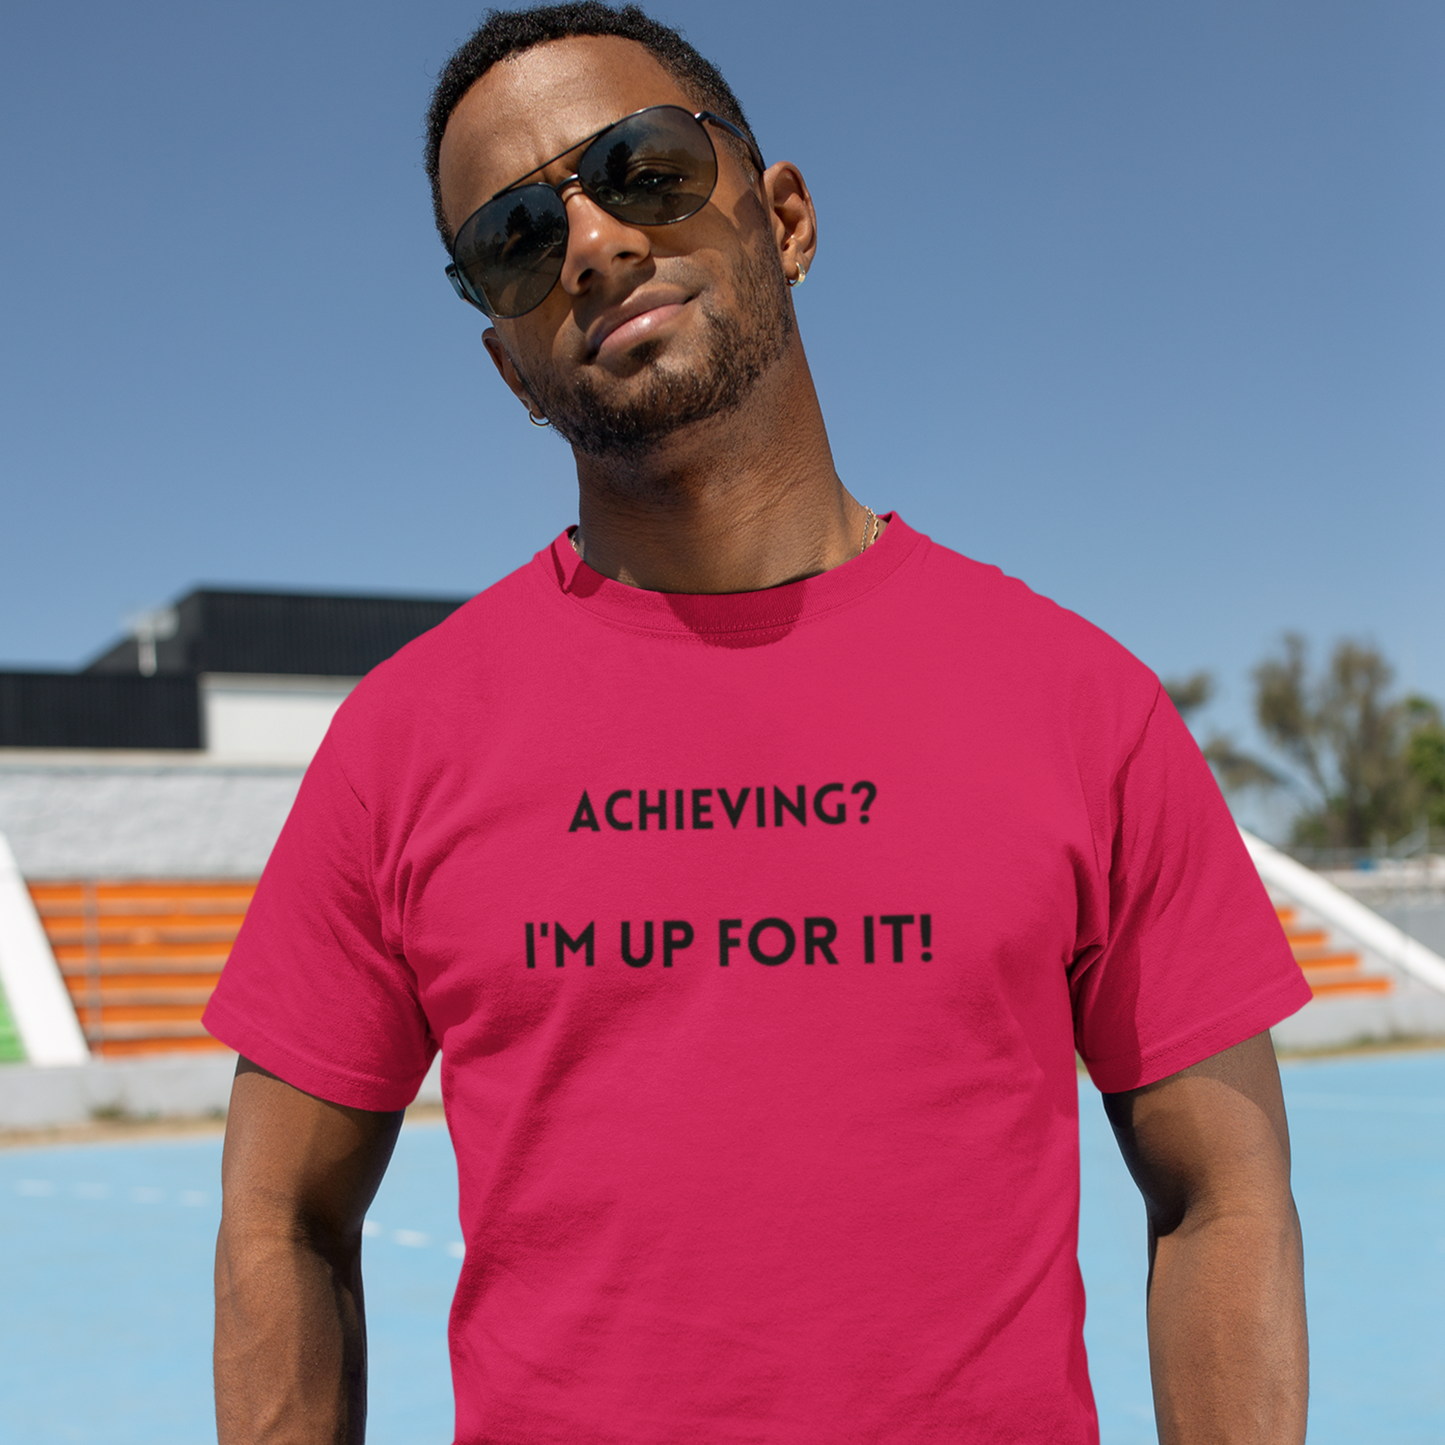 Achieving? I am up for it! t shirt tee shirt with inspirational words t shirt gift for students self affirming words t shirt